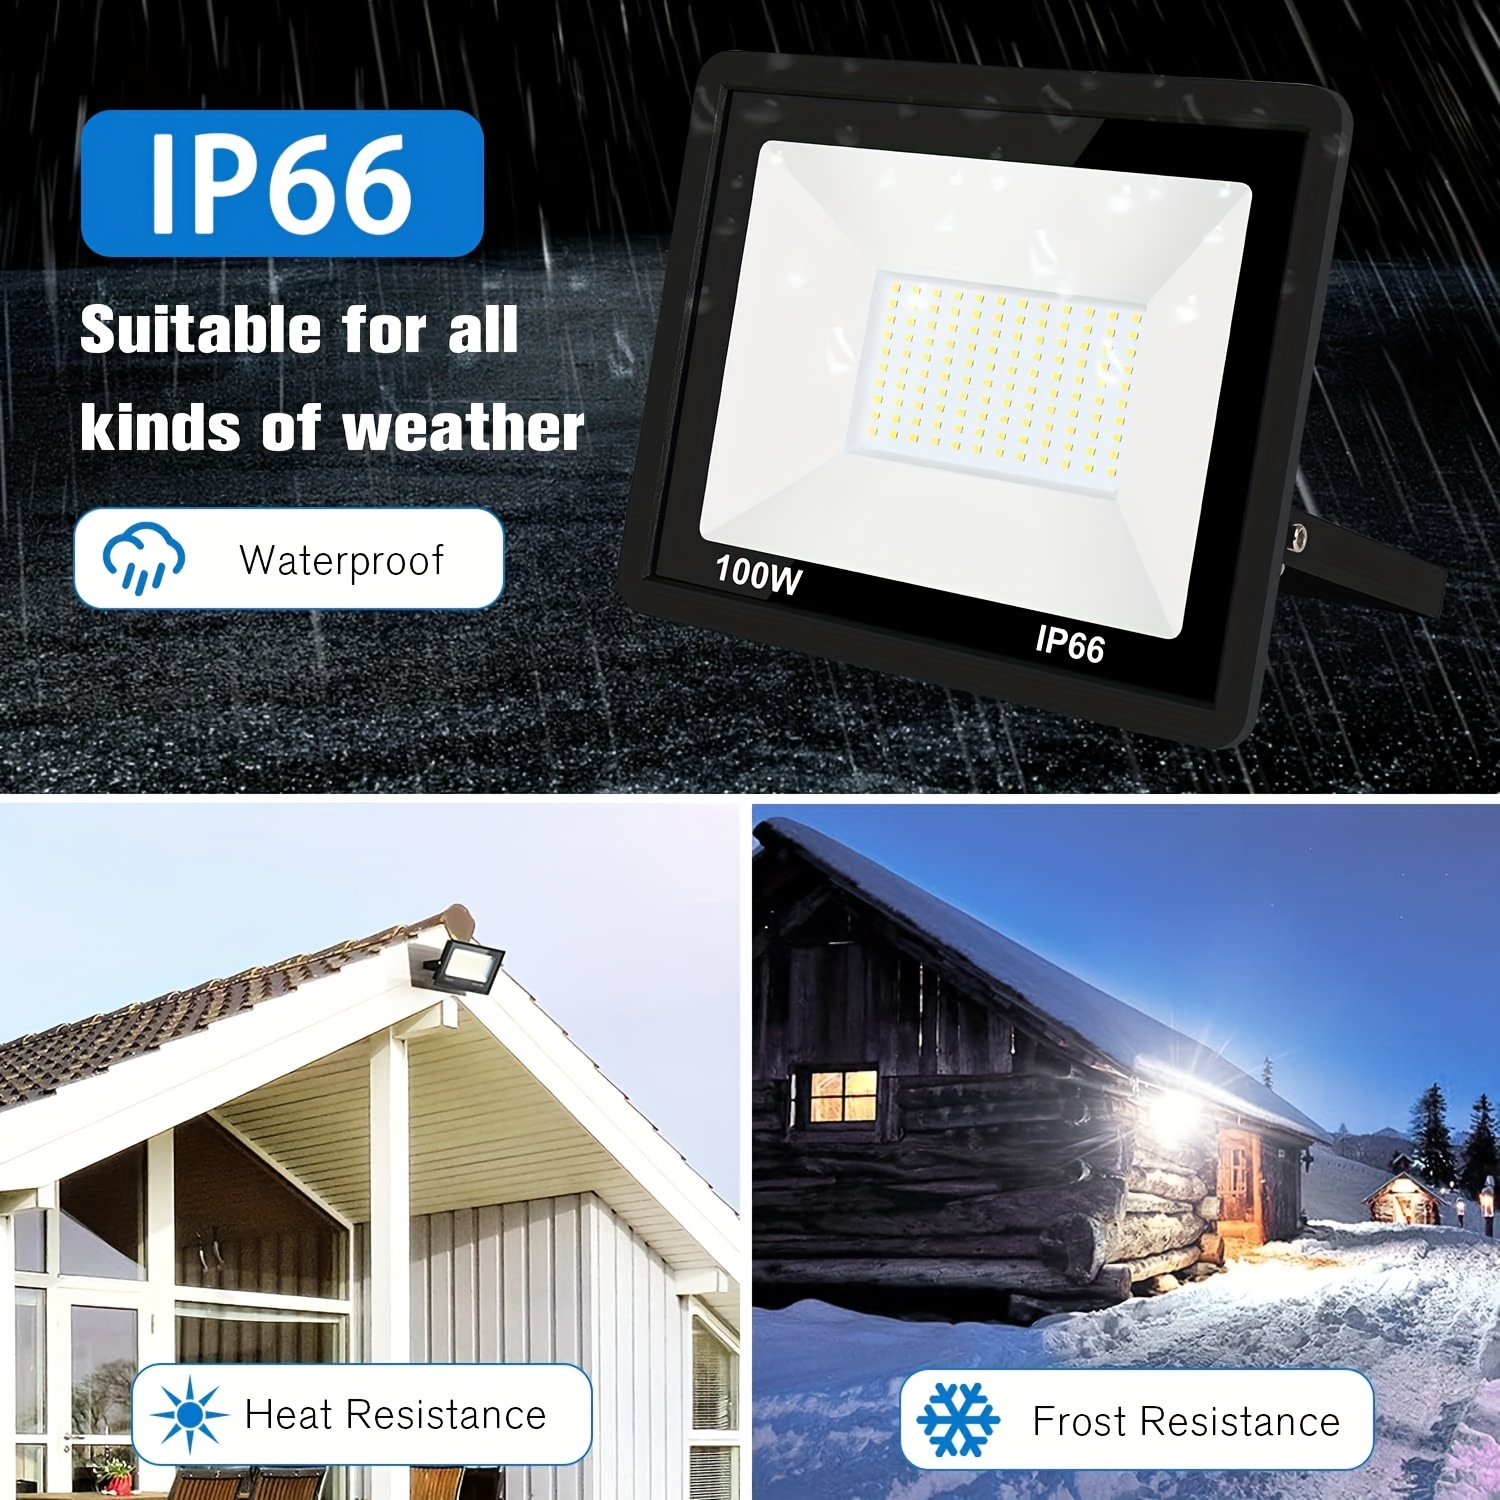 stadium garage playground-1 pack 100w led flood light outdoor floodlight fixture with plug in ip 66 waterproof led work light 6500 k security light for yard garden stadium garage playground details 5